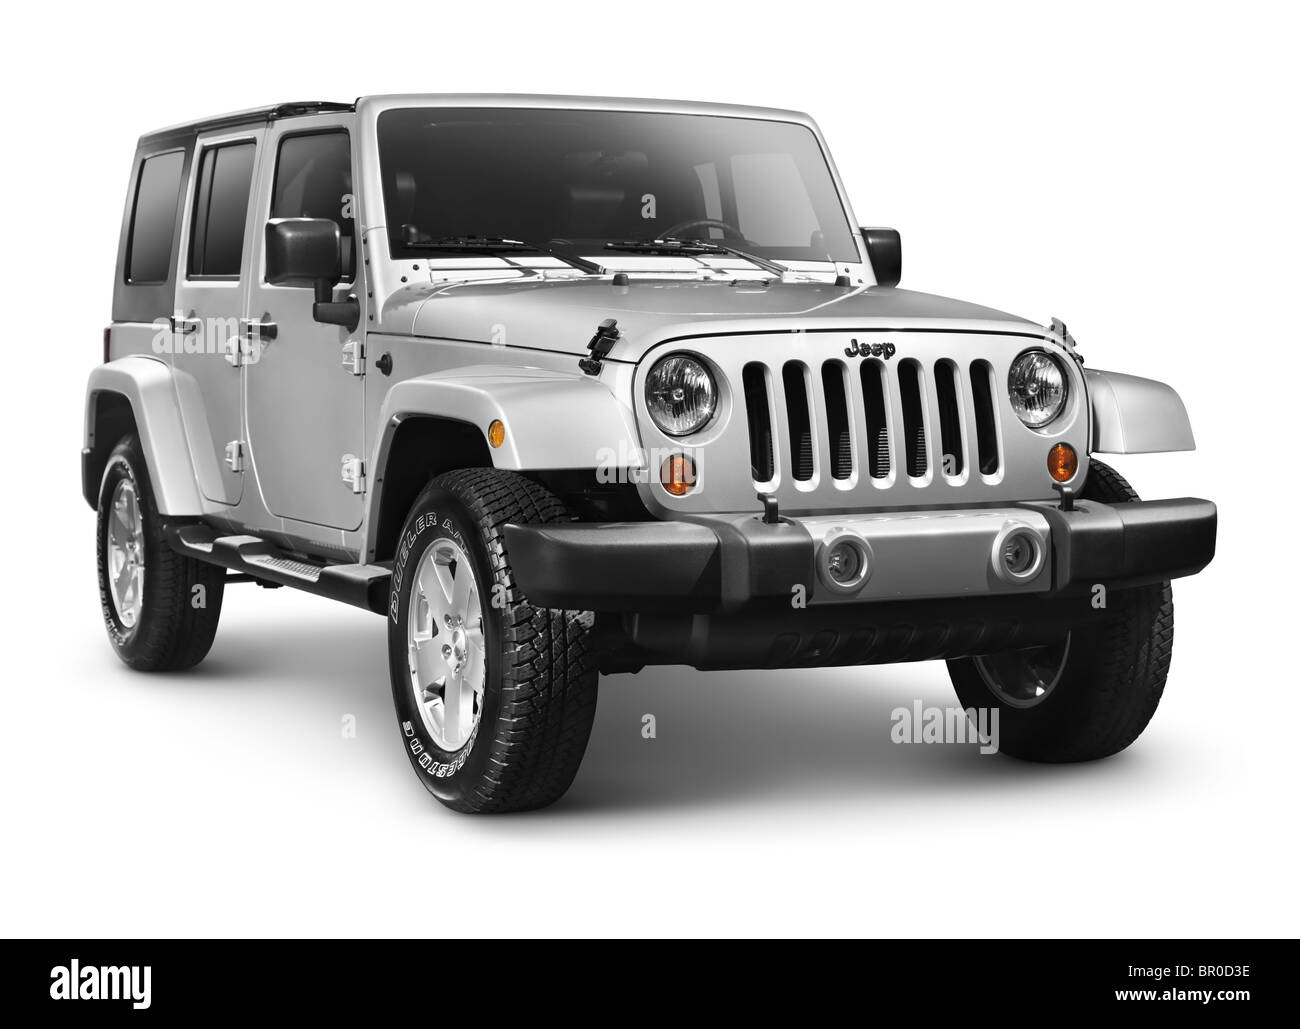 License available at  - Silver 2011 Jeep Wrangler Unlimited  Sahara 4x4 SUV isolated on white background with clipping path Stock Photo  - Alamy